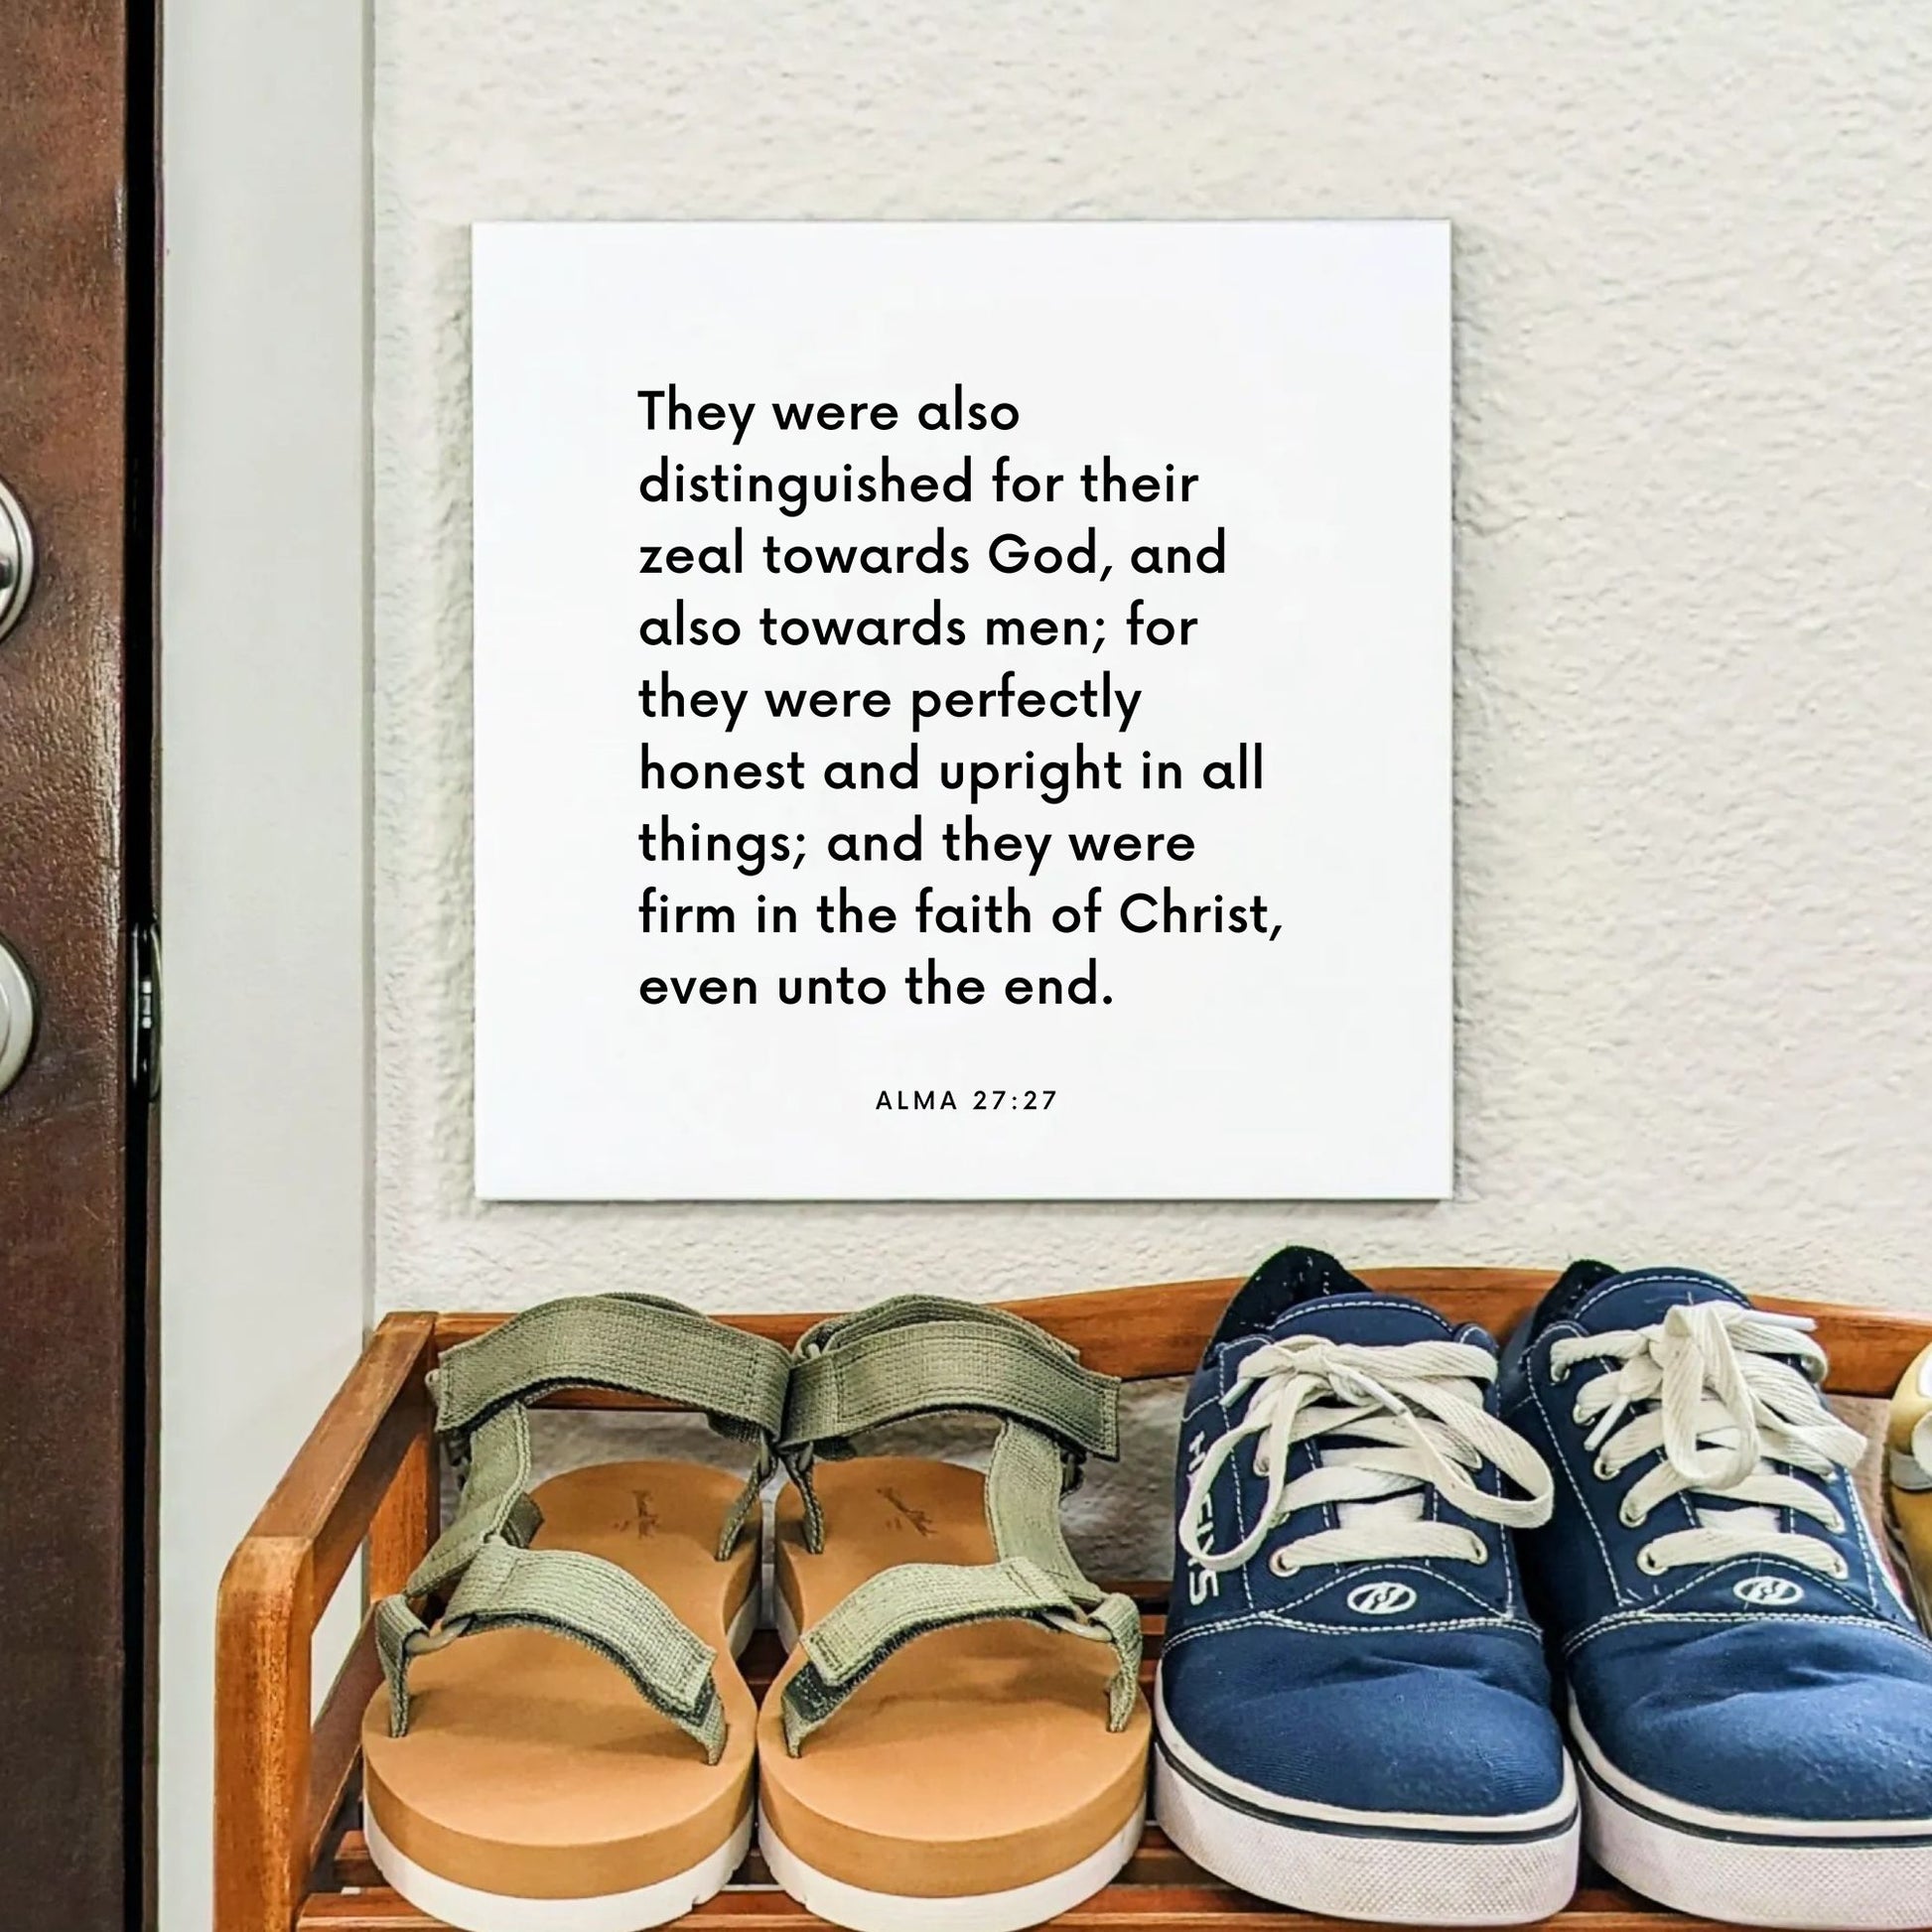 Shoes mouting of the scripture tile for Alma 27:27 - "They were perfectly honest and upright in all things"